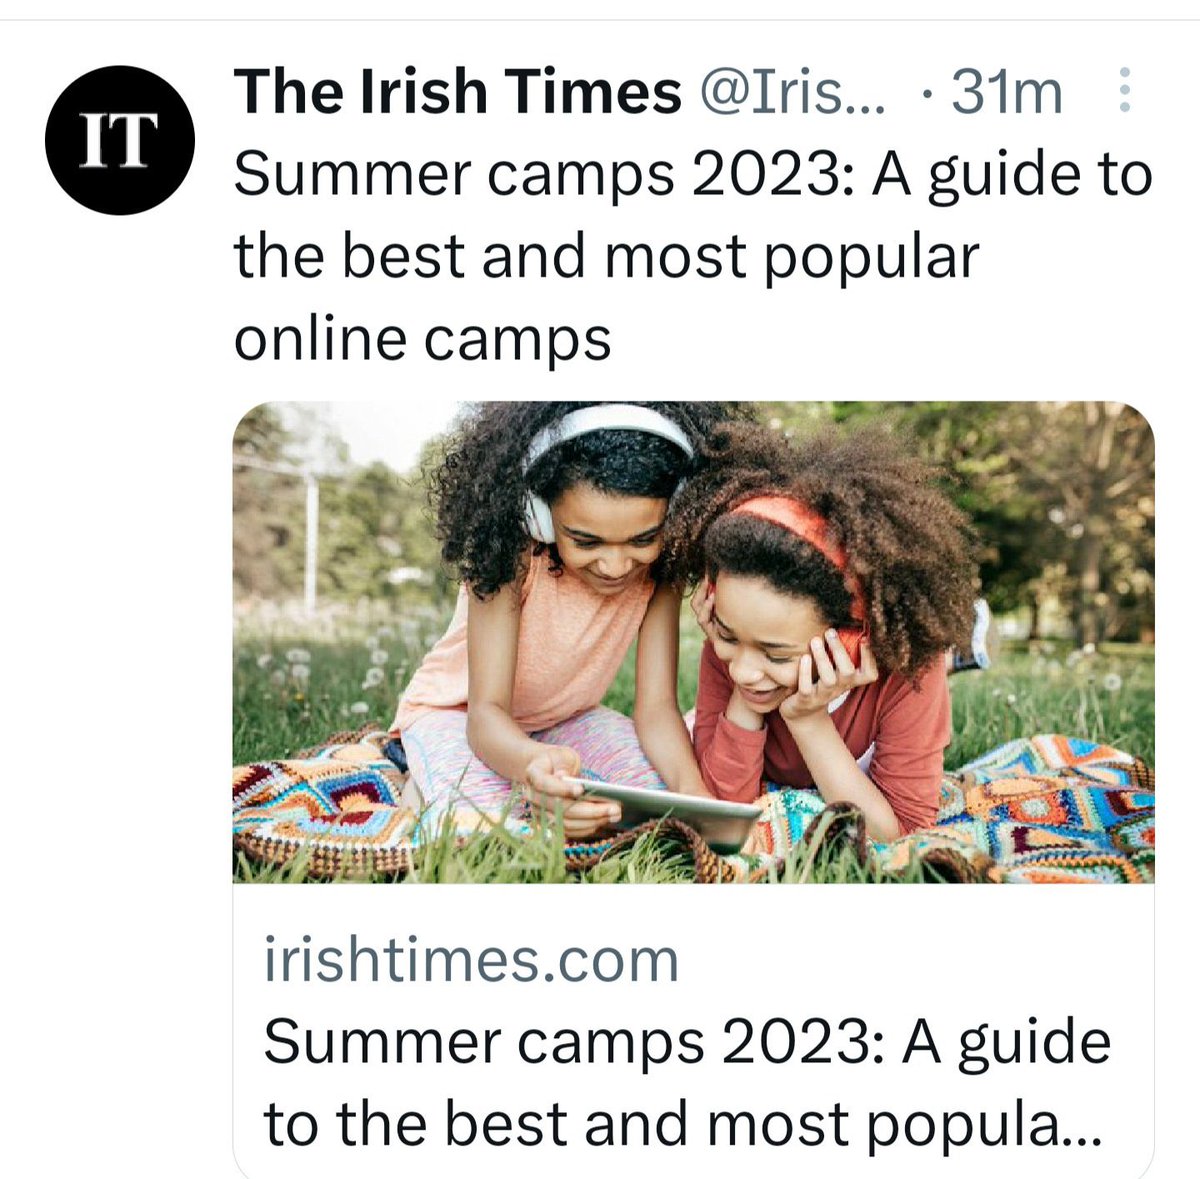 The Irish Times discussing….er, camps.